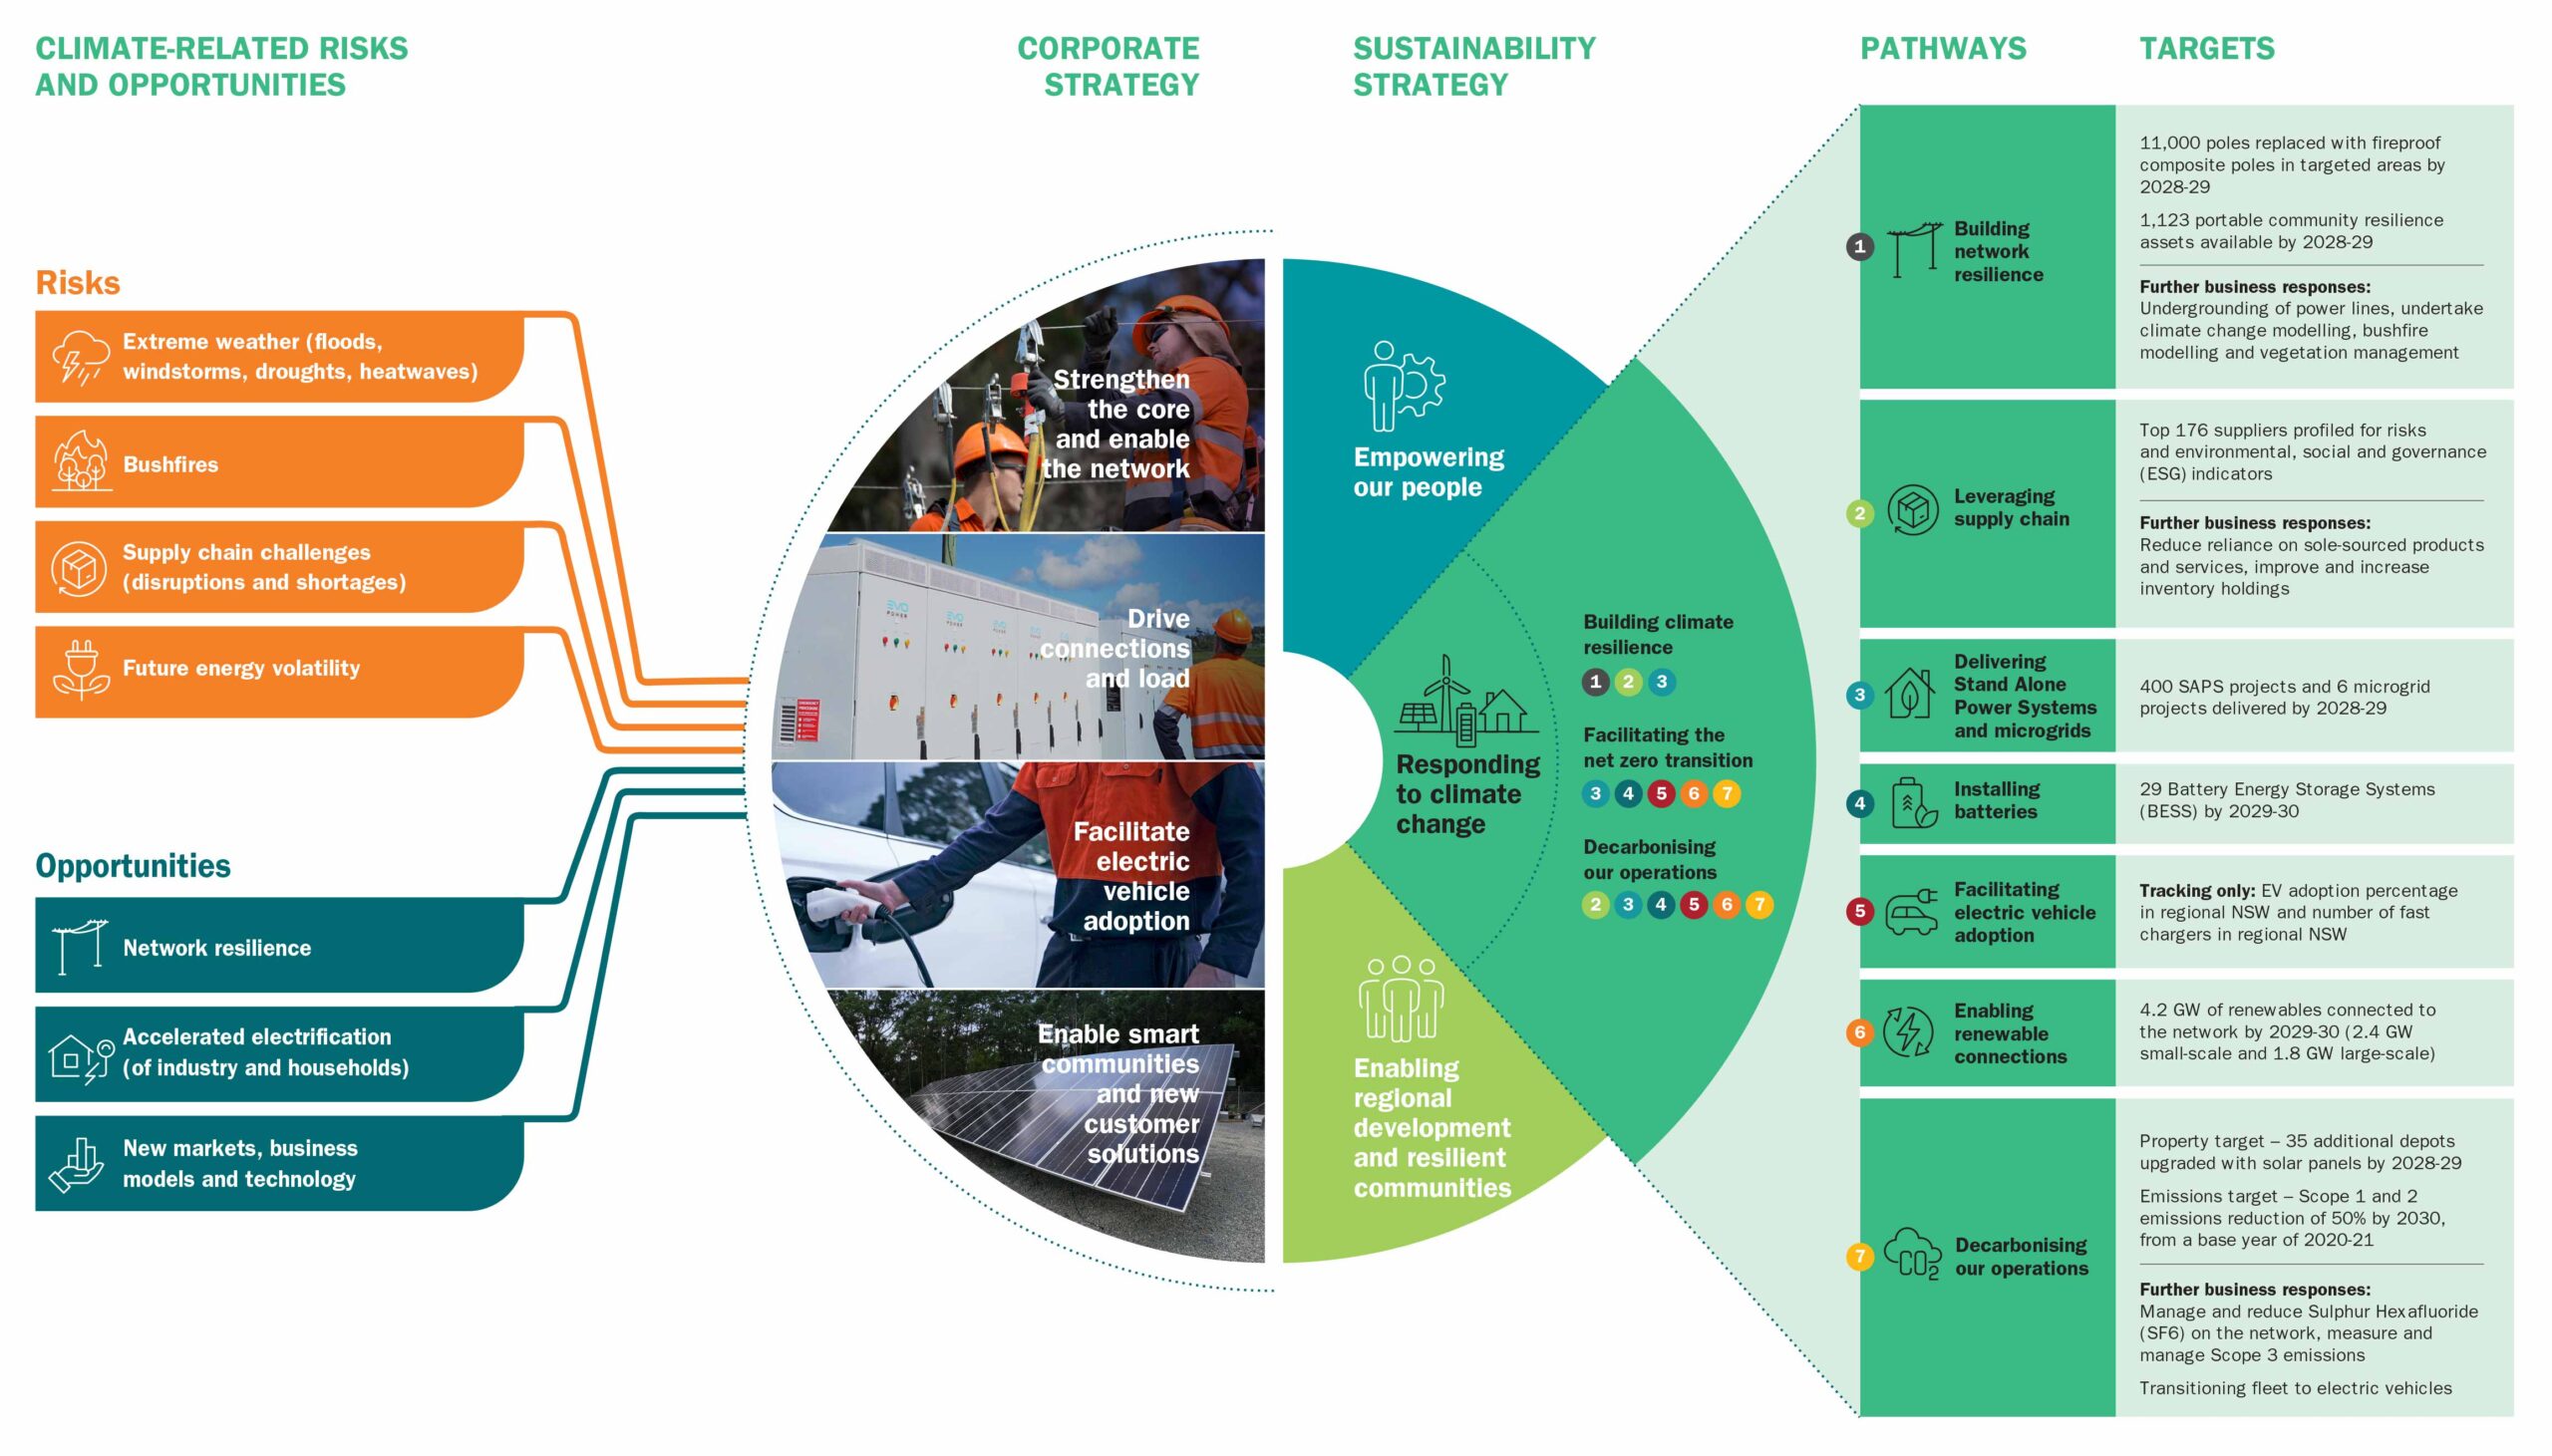 Our Climate Response infographic provides of an overview of the climate-related risks and opportunities that inform our corporate strategy and sustainability strategy.